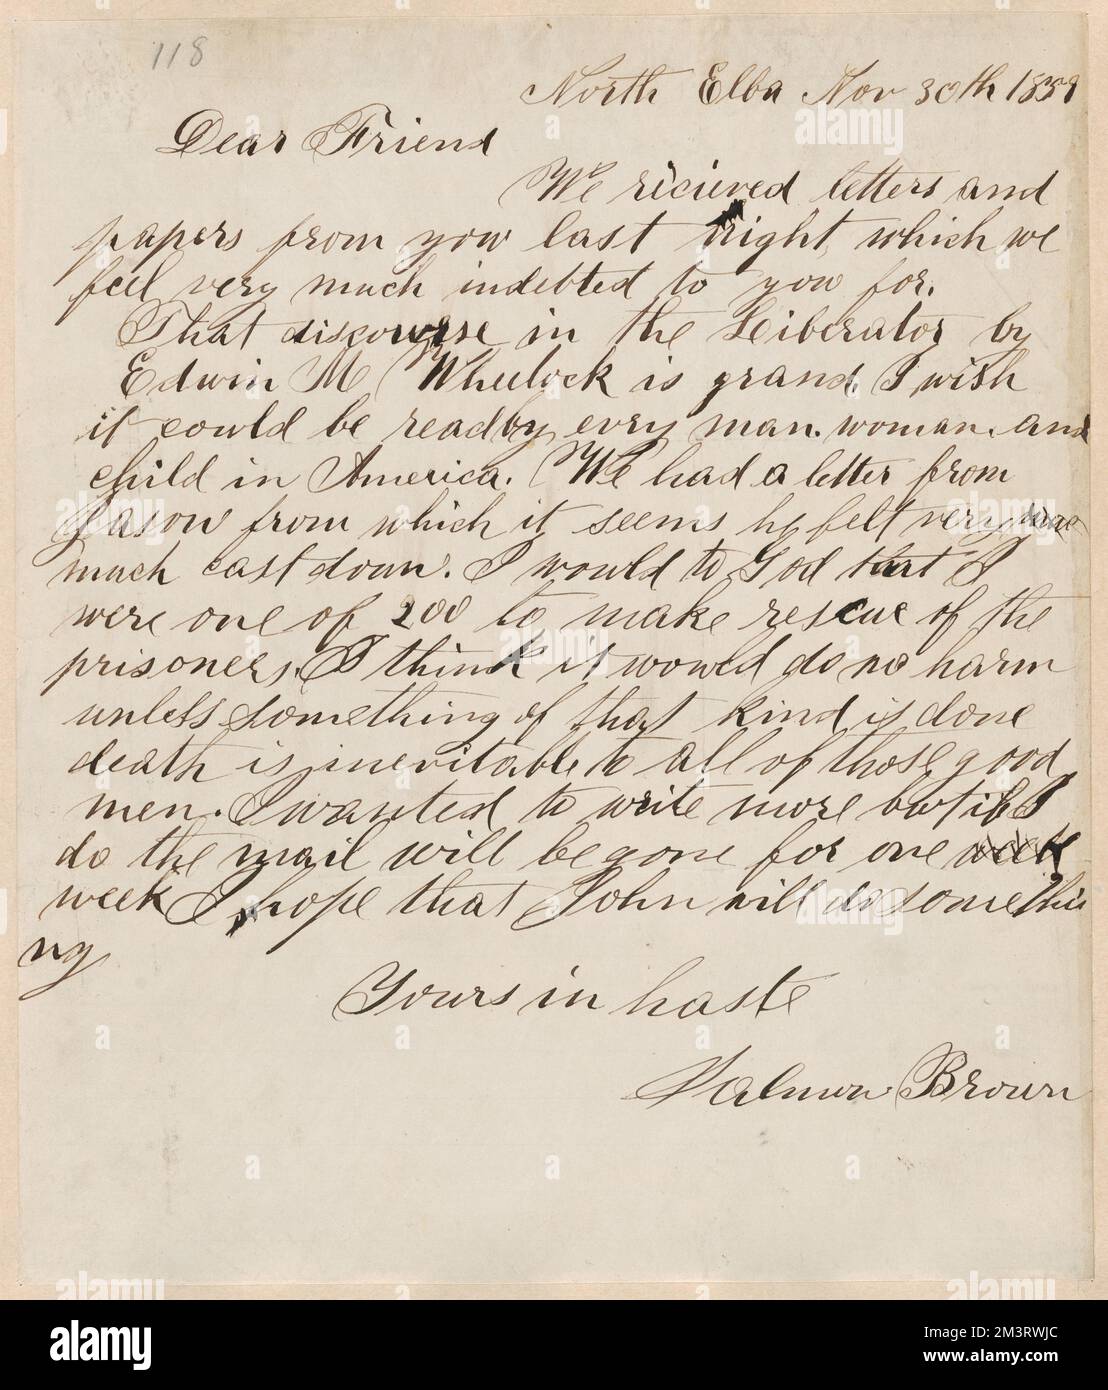 Salmon Brown autograph letter signed to [Thomas Wentworth Higginson], North Elba, [N.Y.], 30 November 1859 , Abolitionists, United States, Antislavery movements, United States, History, 19th century, Harpers Ferry W. Va., History, John Brown's Raid, 1859, Wheelock, Edwin M. Edwin Miller, 1829-1901. John Brown- Correspondence relating to John Brown and the raid on Harpers Ferry Stock Photo